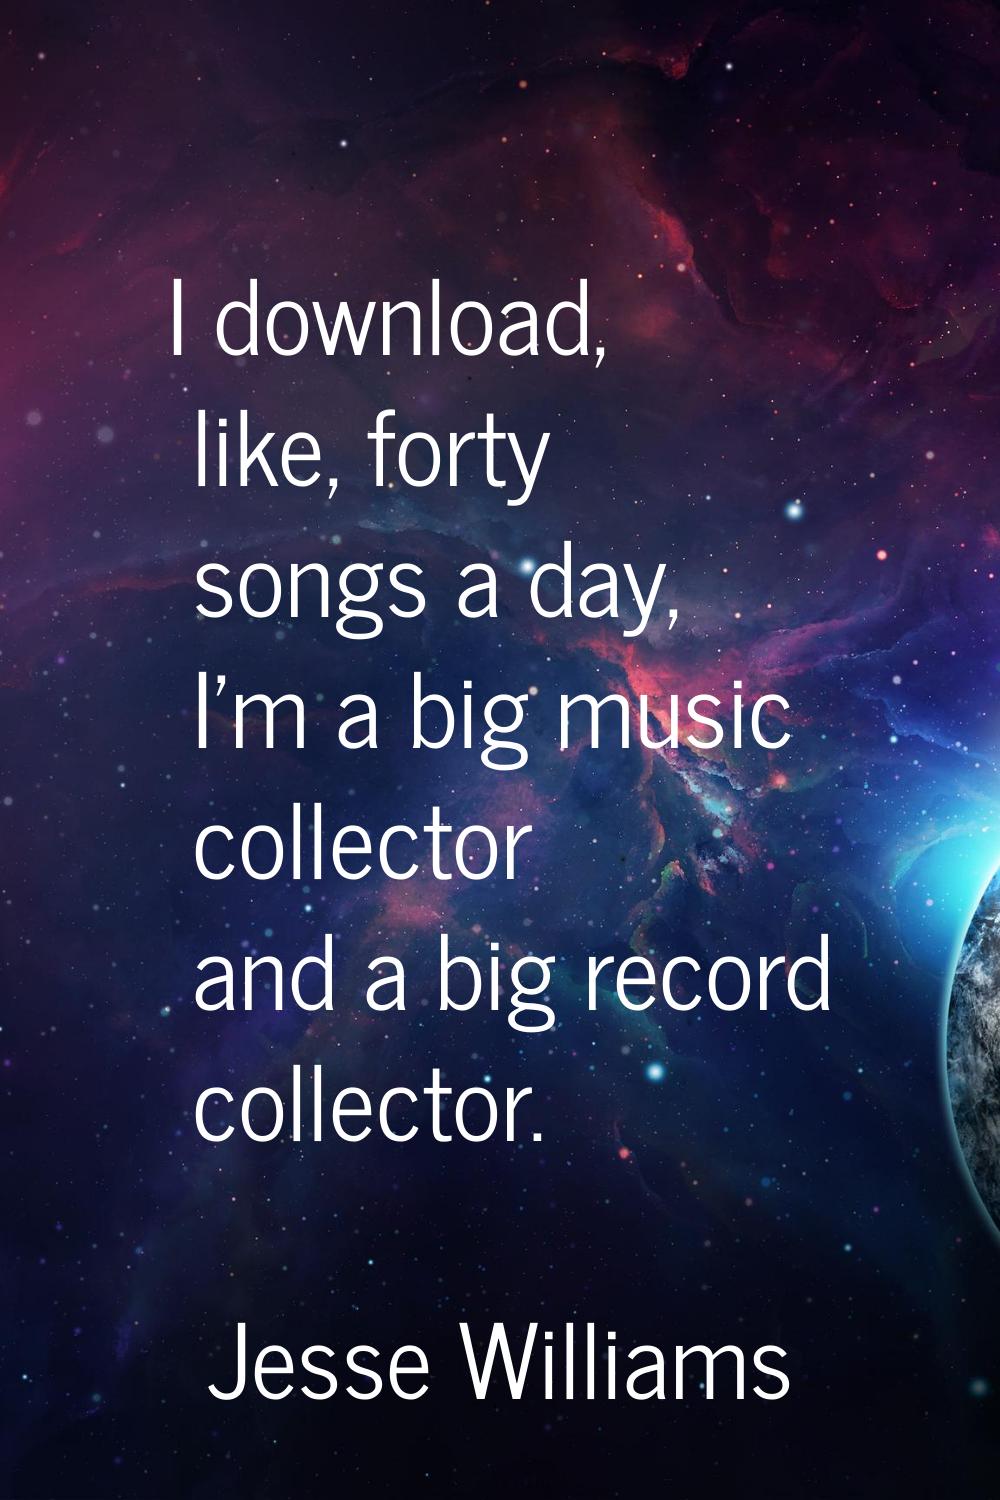 I download, like, forty songs a day, I'm a big music collector and a big record collector.